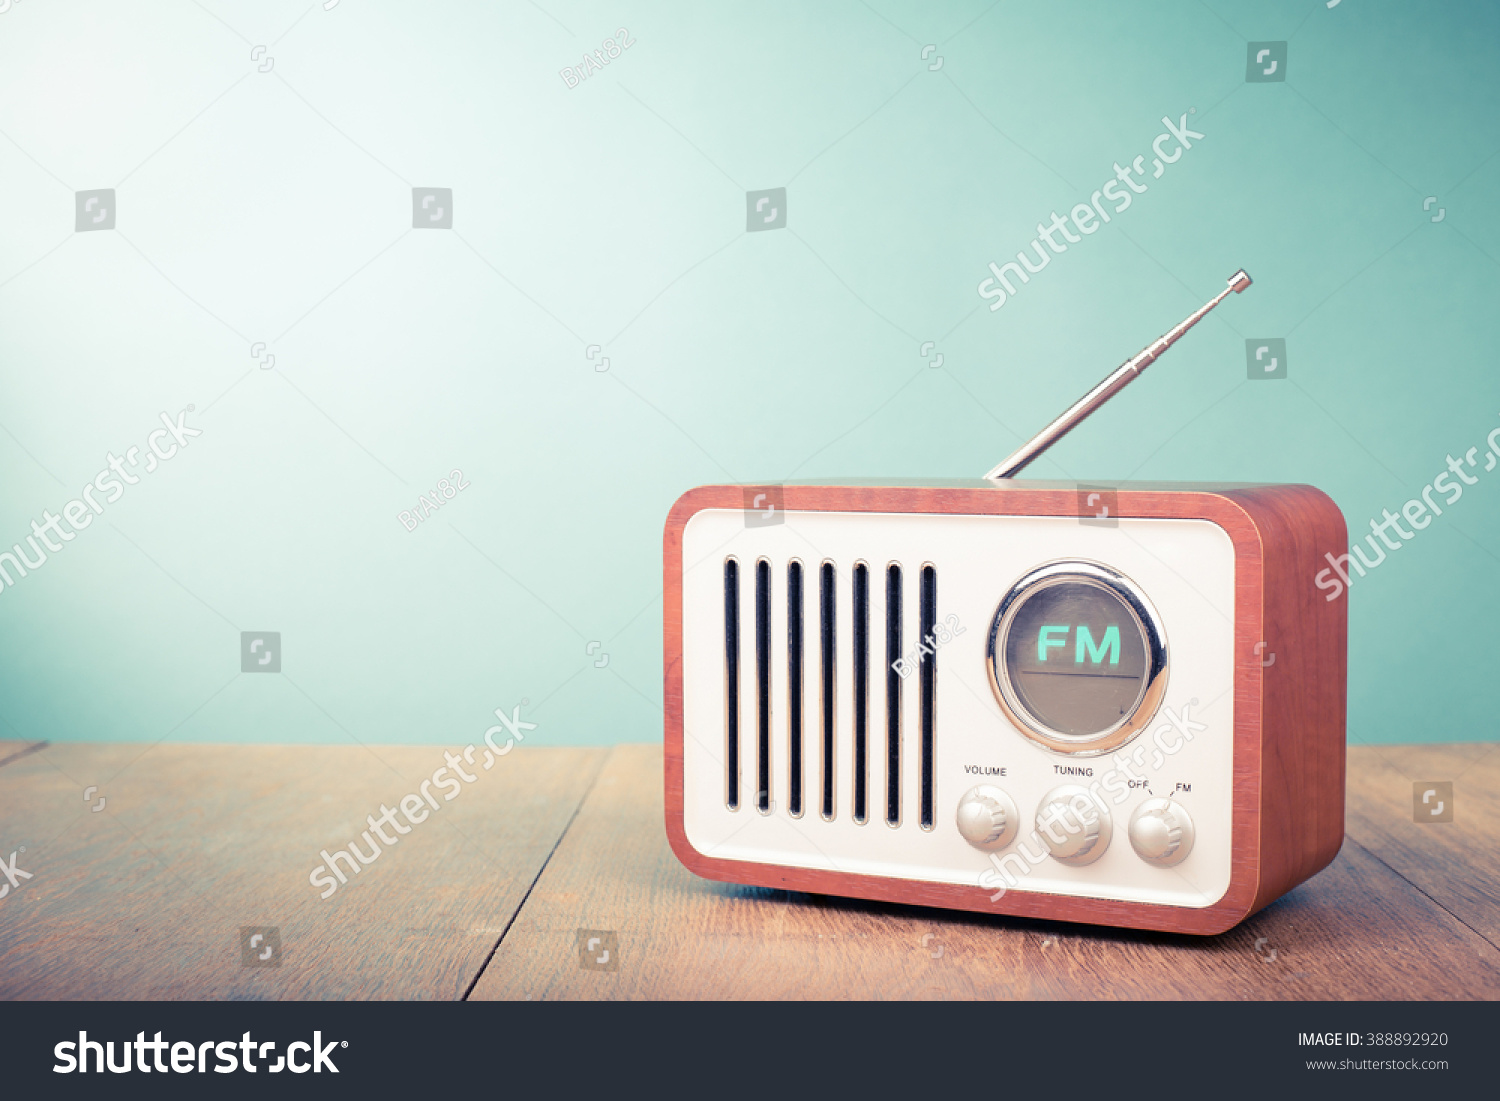 Retro old radio front mint green background. Vintage style filtered photo #388892920